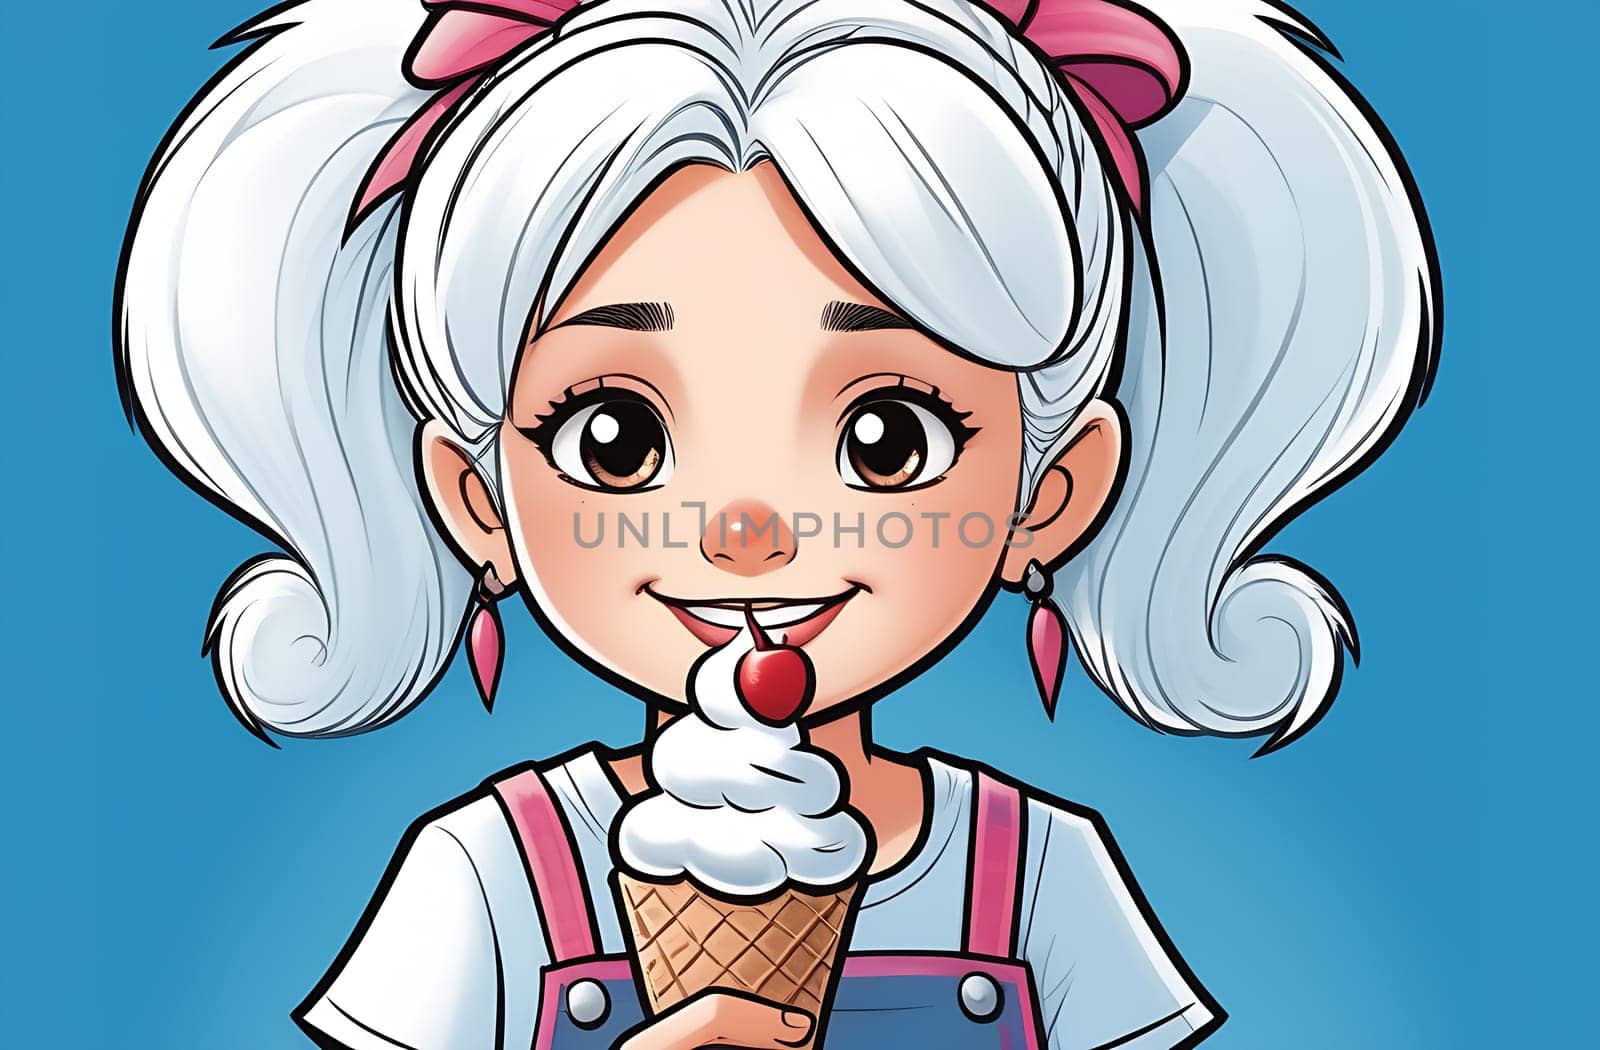 Cute cartoon little girl eating an ice cream cone, on a blue background, close-up by claire_lucia